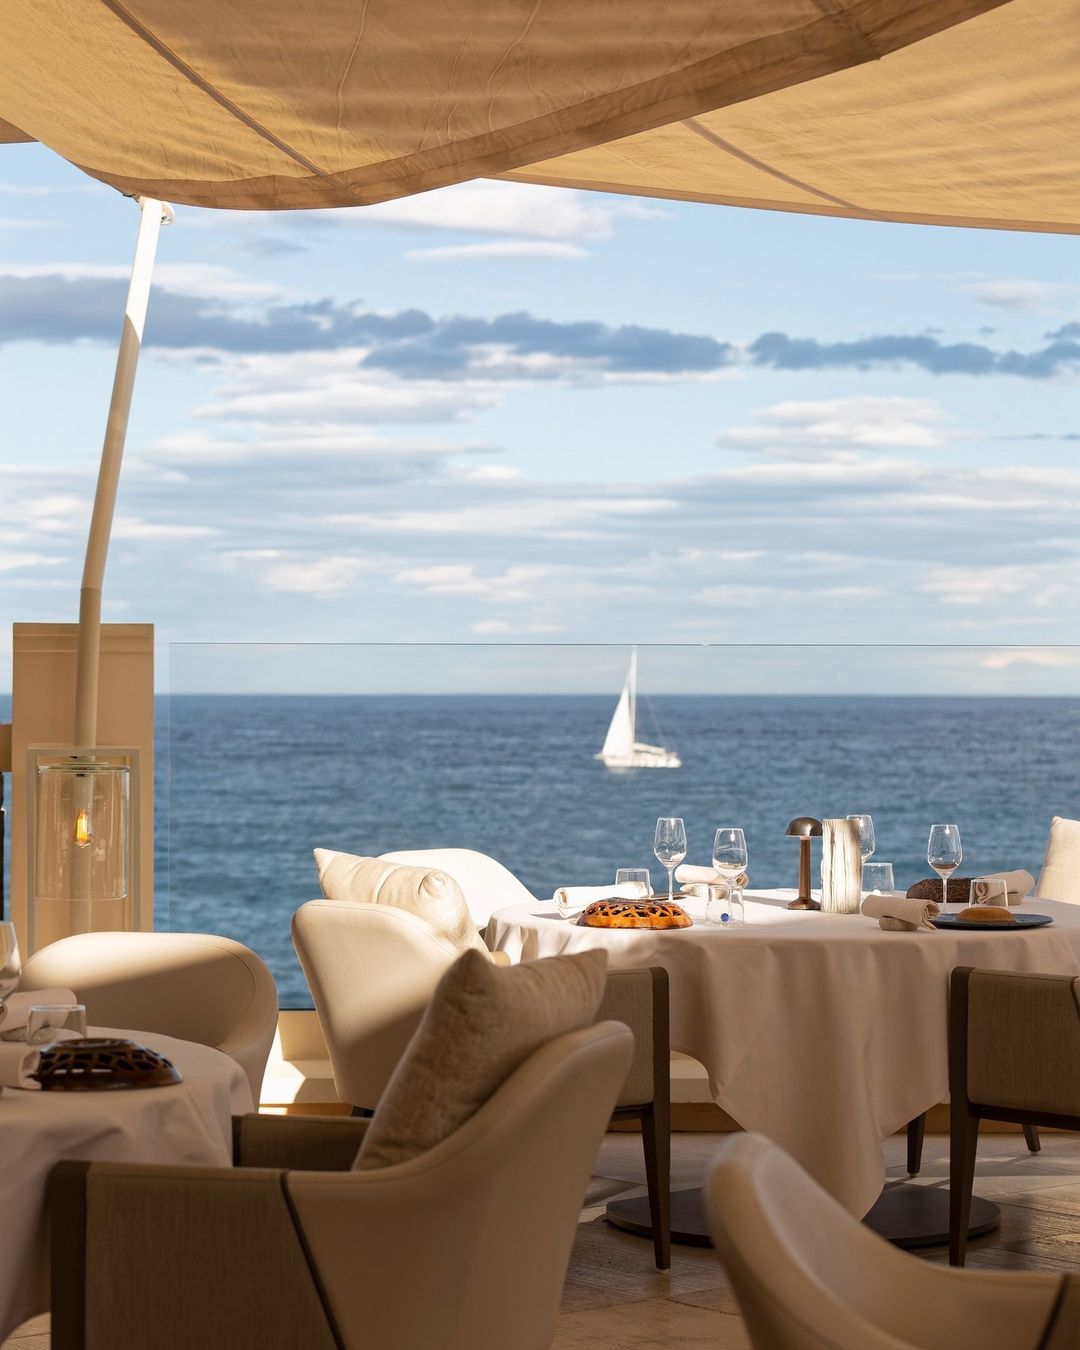 Dive your eyes into the Big Blue, feel the light breeze of summer evenings, while enjoying a refined menu